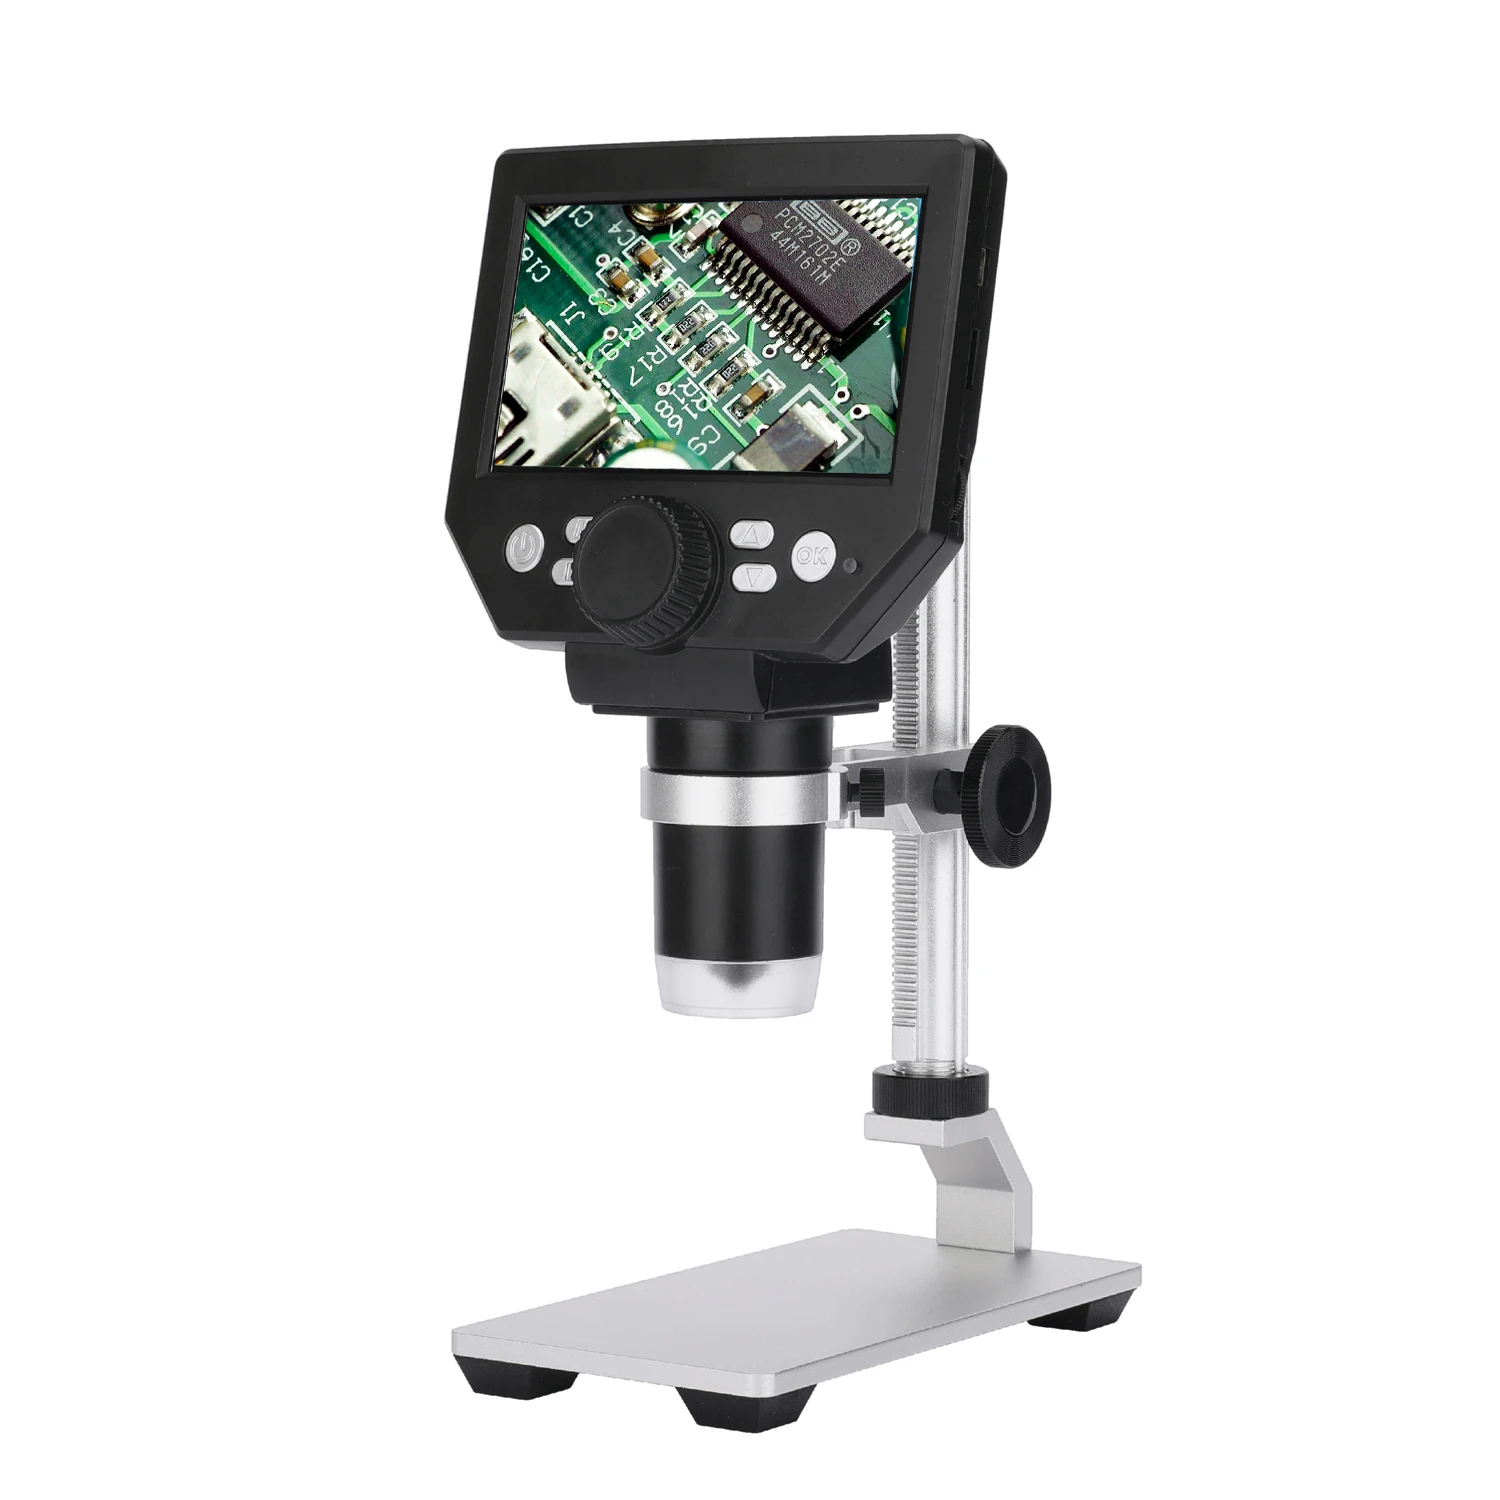 G1000 Digital Microscope Camera  Electronic Microscope 4.3 Inch LCD Display 8MP 1-1000X Continuous Amplification Magnifier